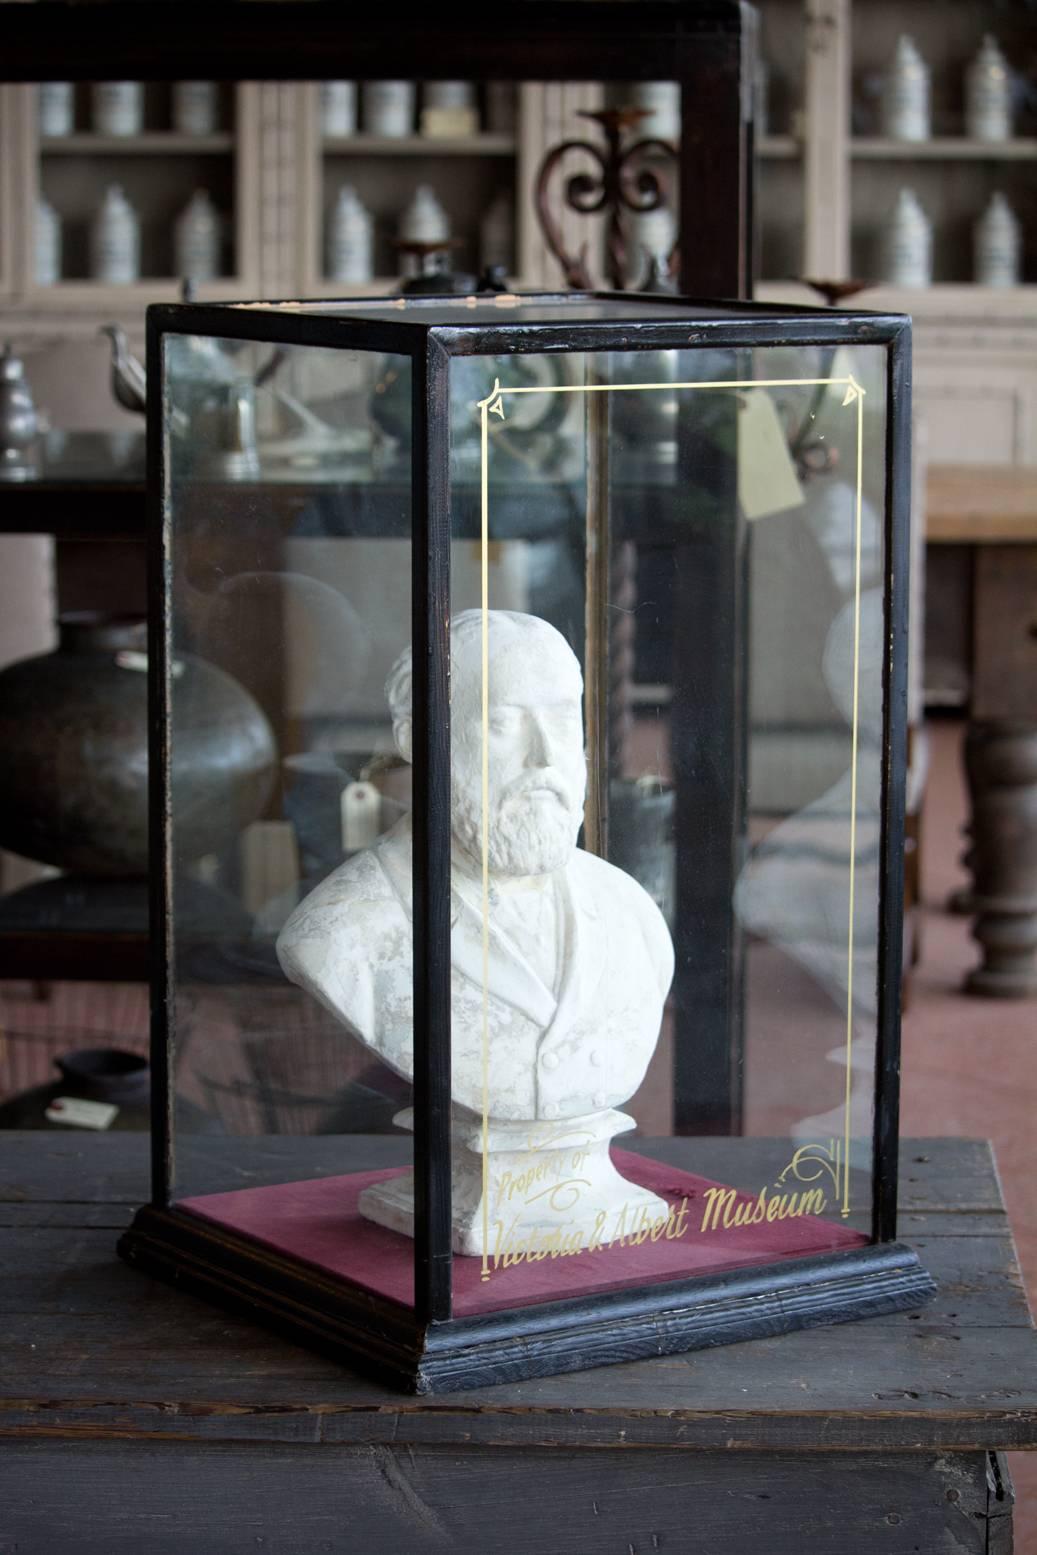 Antique plaster bust of His Royal Highness, King Edward VII, son of Queen Victoria. The bust is displayed in an Edwardian glass case inscribed property of Victoria & Albert Museum, which may have been painted on at a later date.